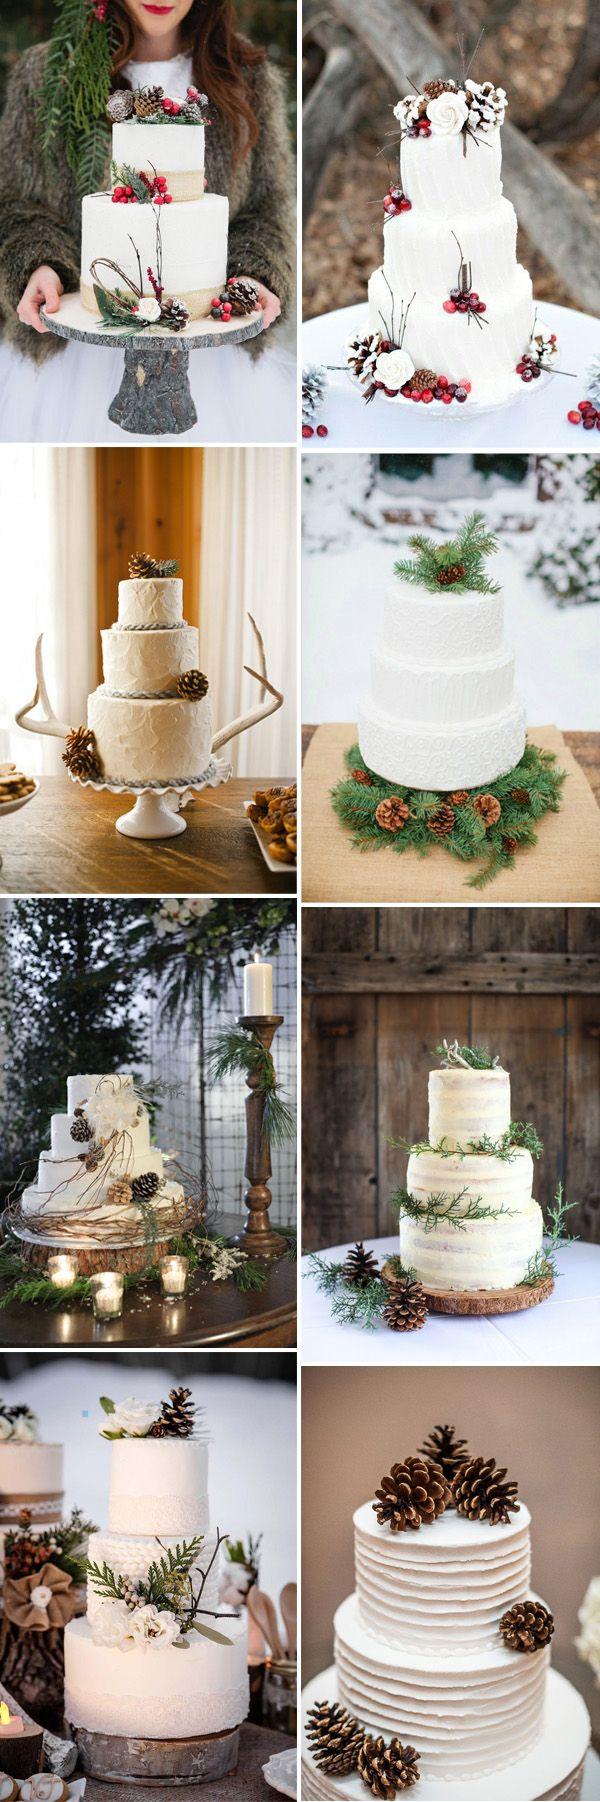 Hochzeit - 21 Beautiful Wedding Cakes With Winter Touches For 2015